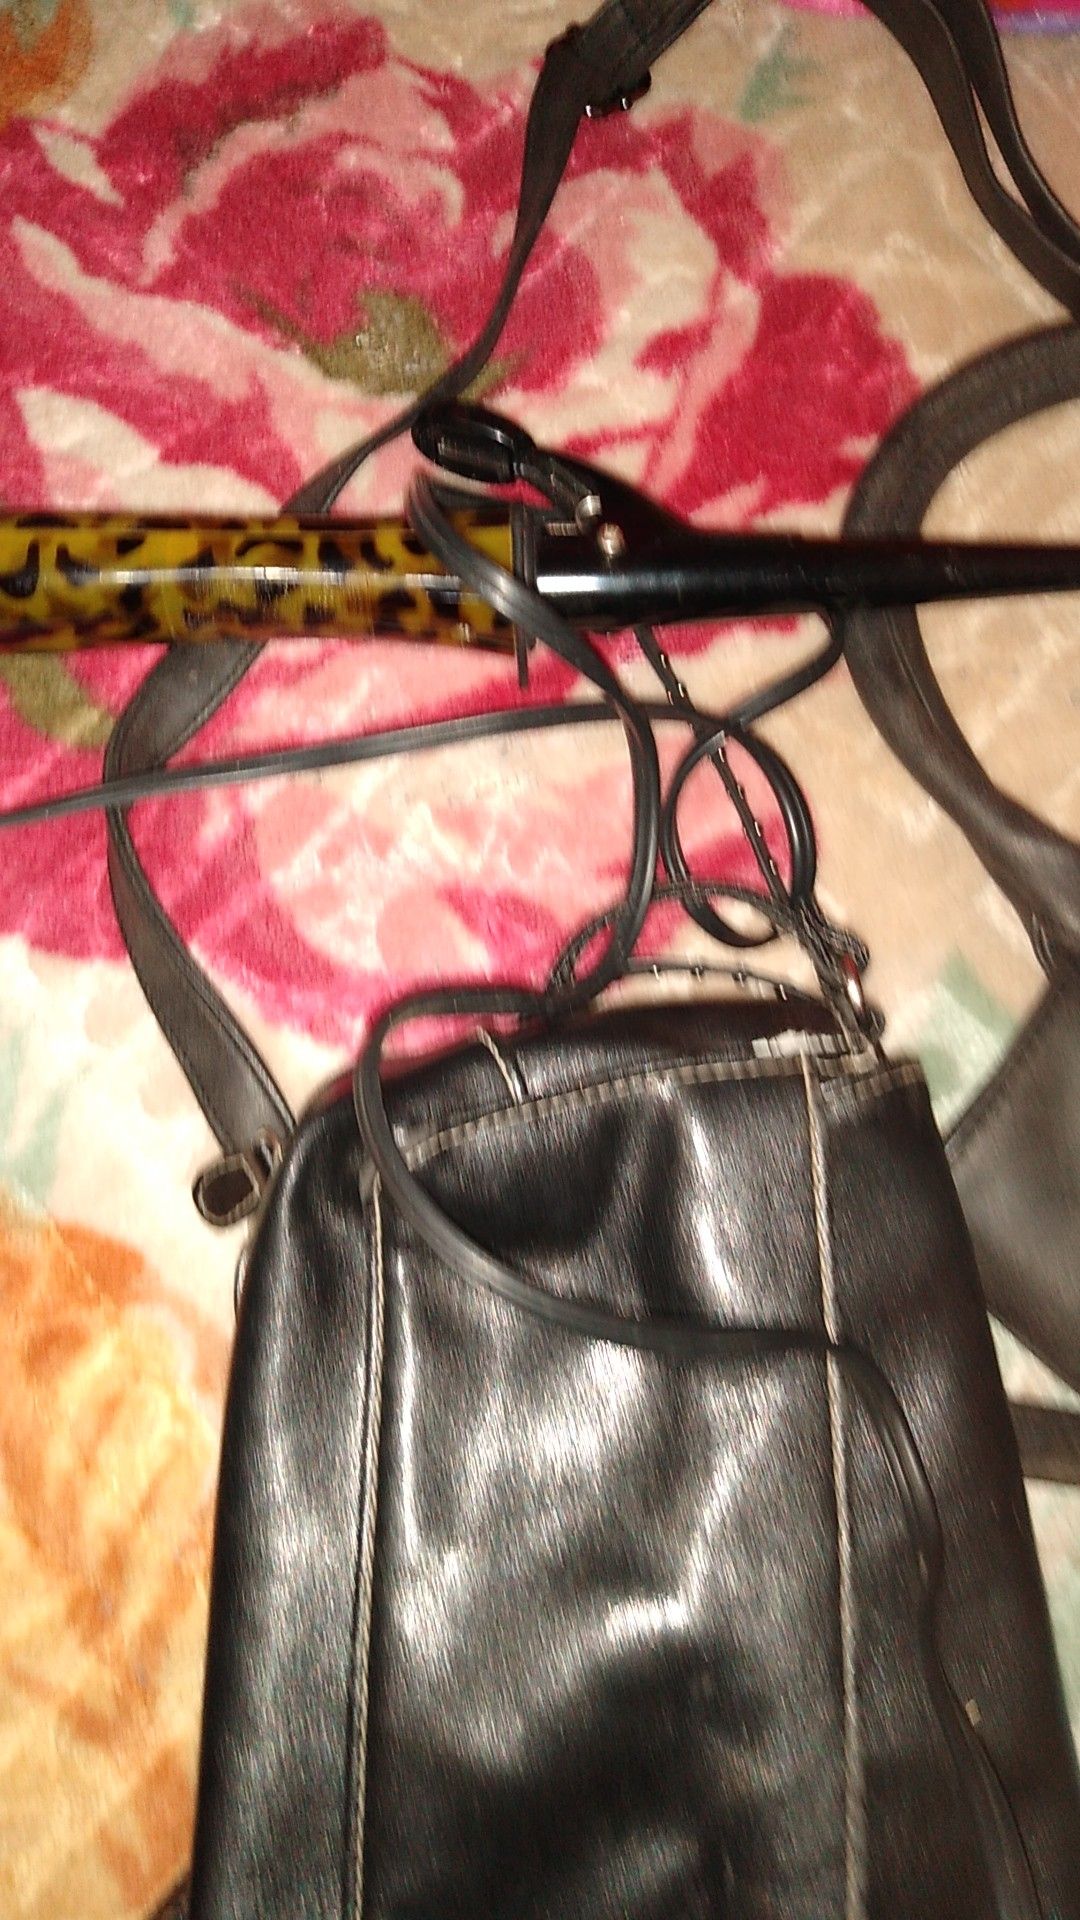 Women's clothes medium and large some has tags..purses and bags and curler